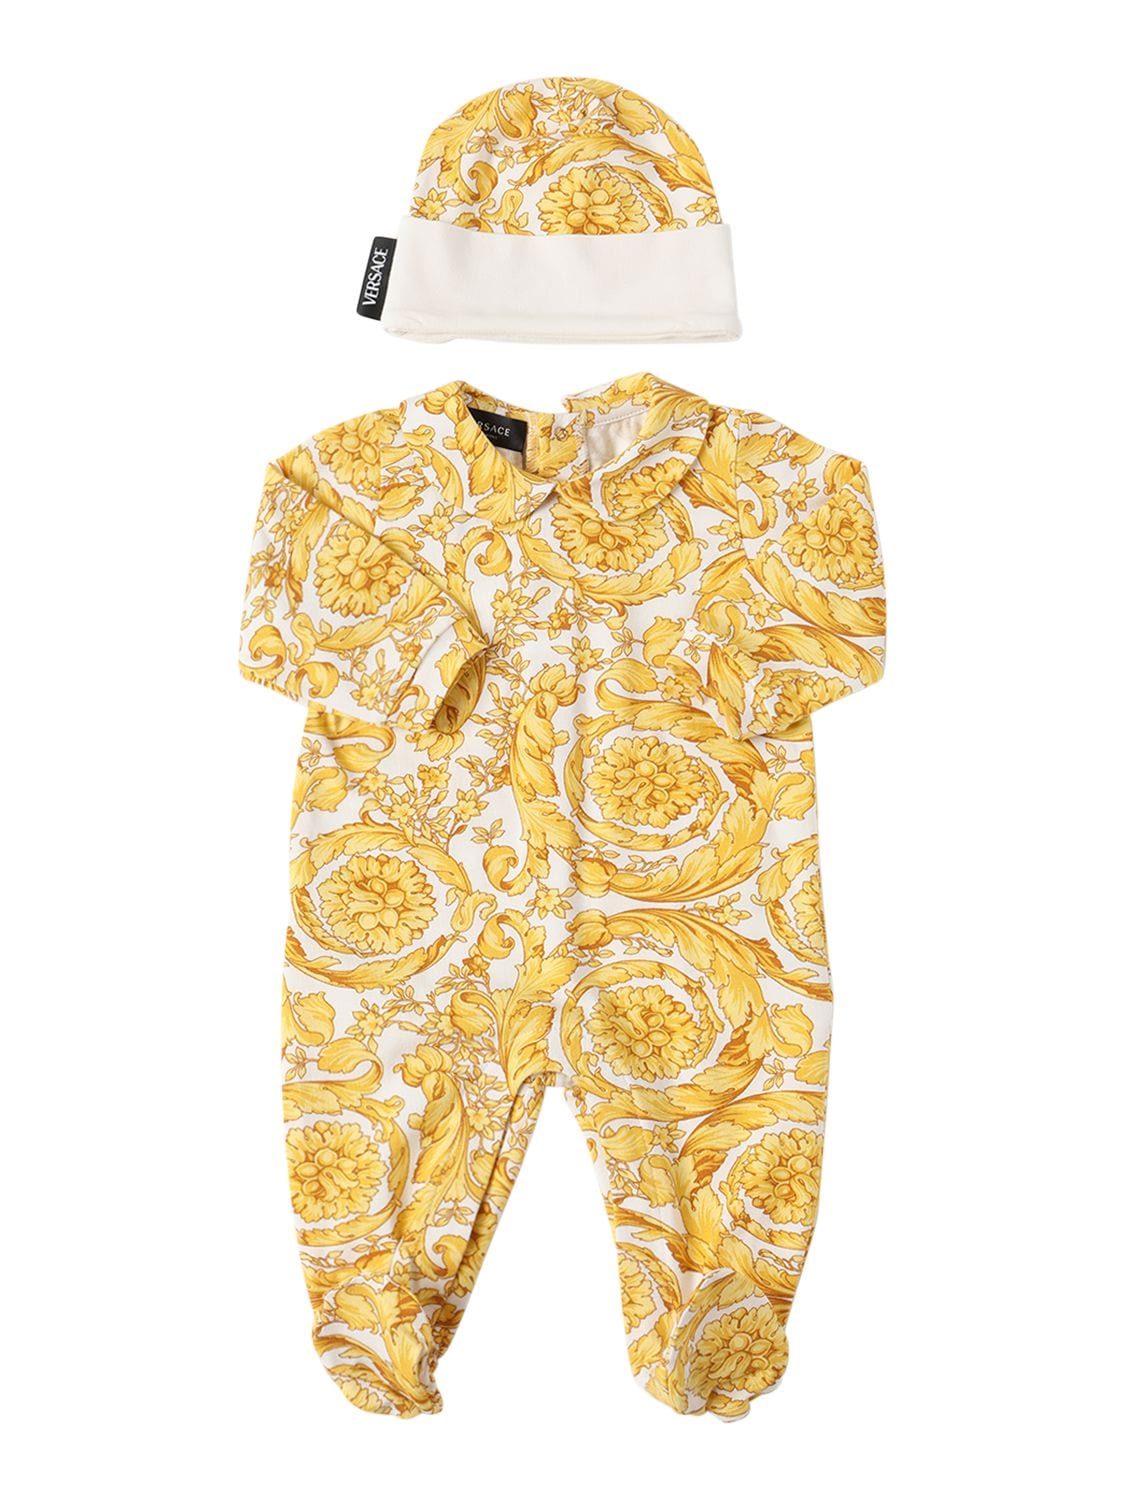 Versace Babies' Baroque Print Cotton Jersey Romper & Hat In White,gold